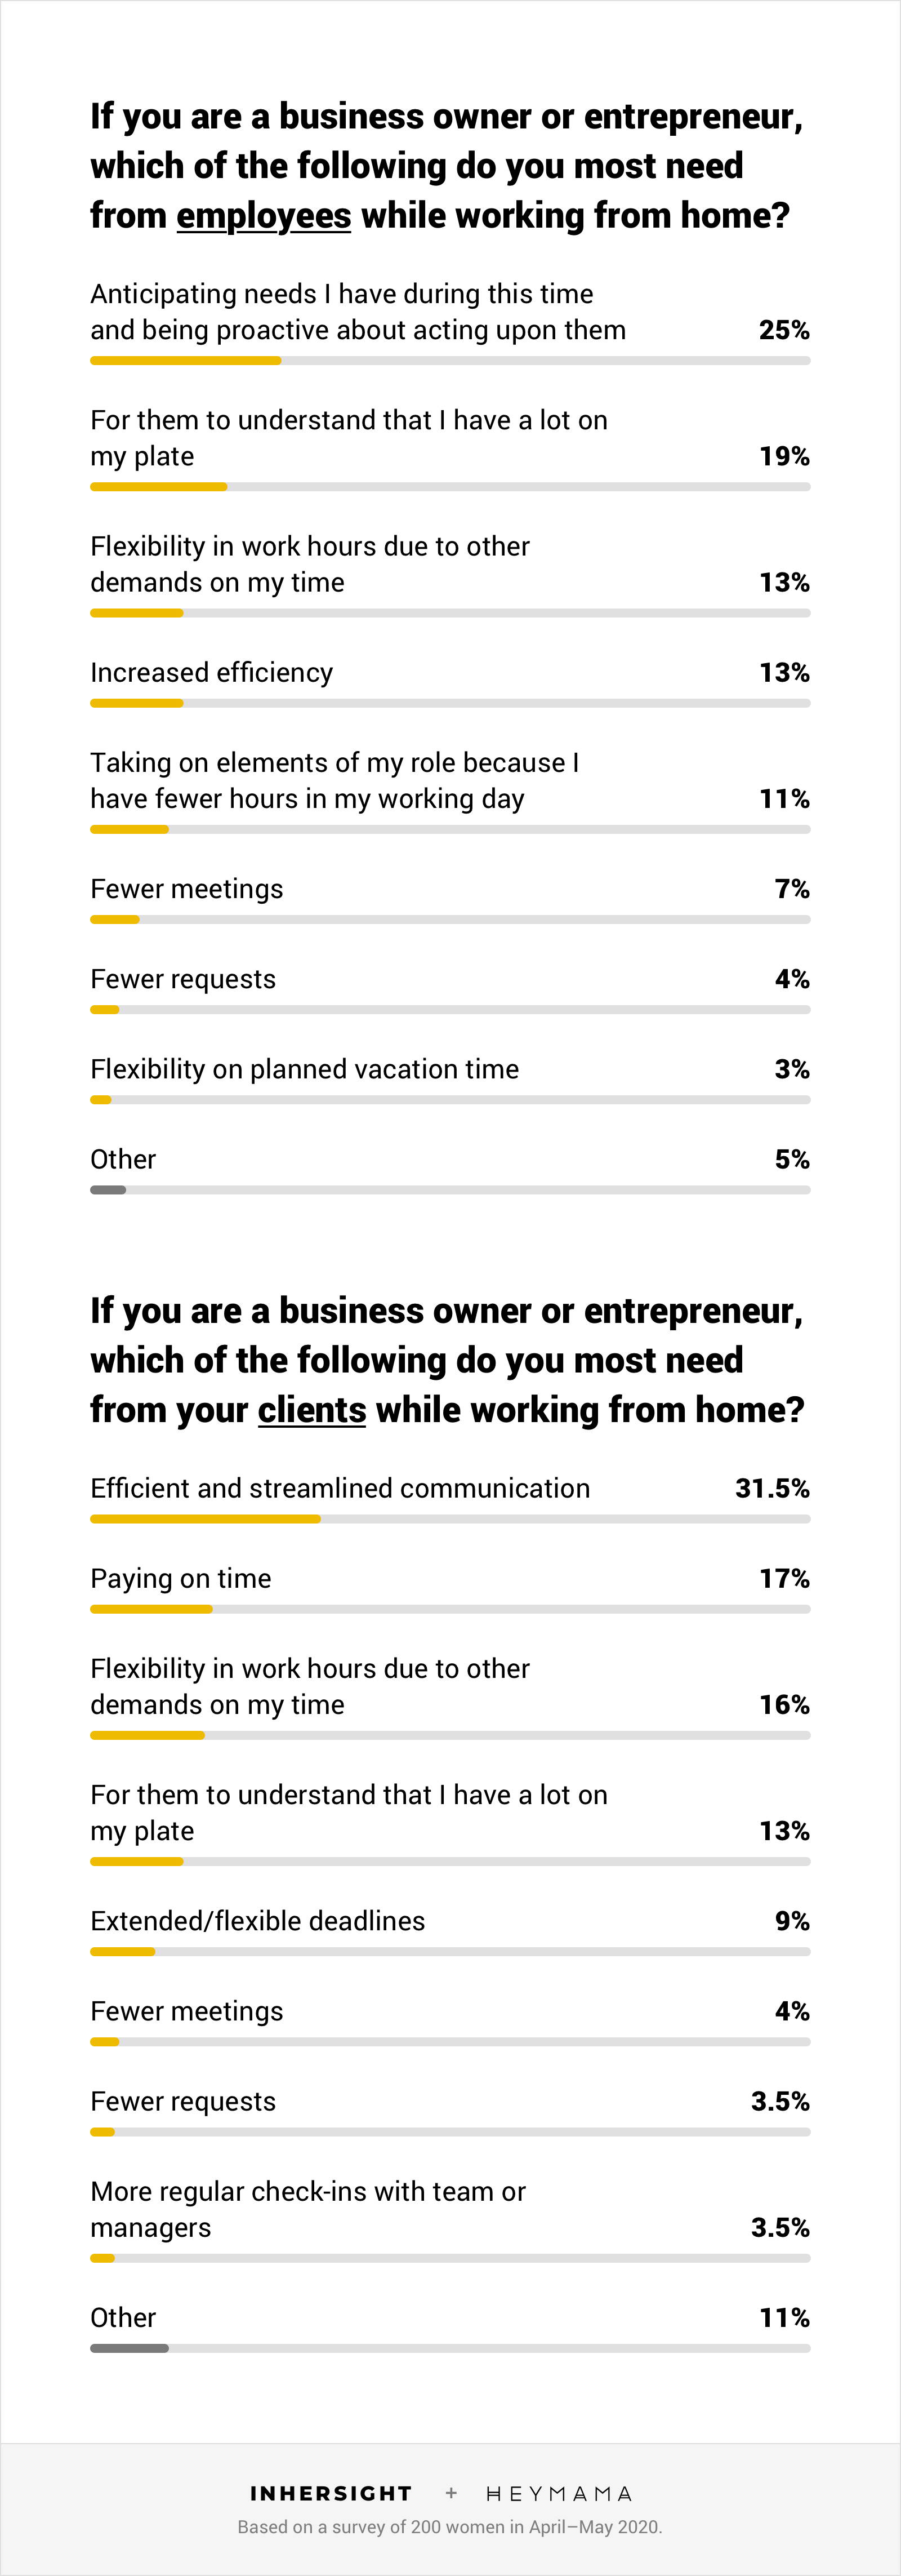 Data - what business owner moms need from employees and clients during covid-19